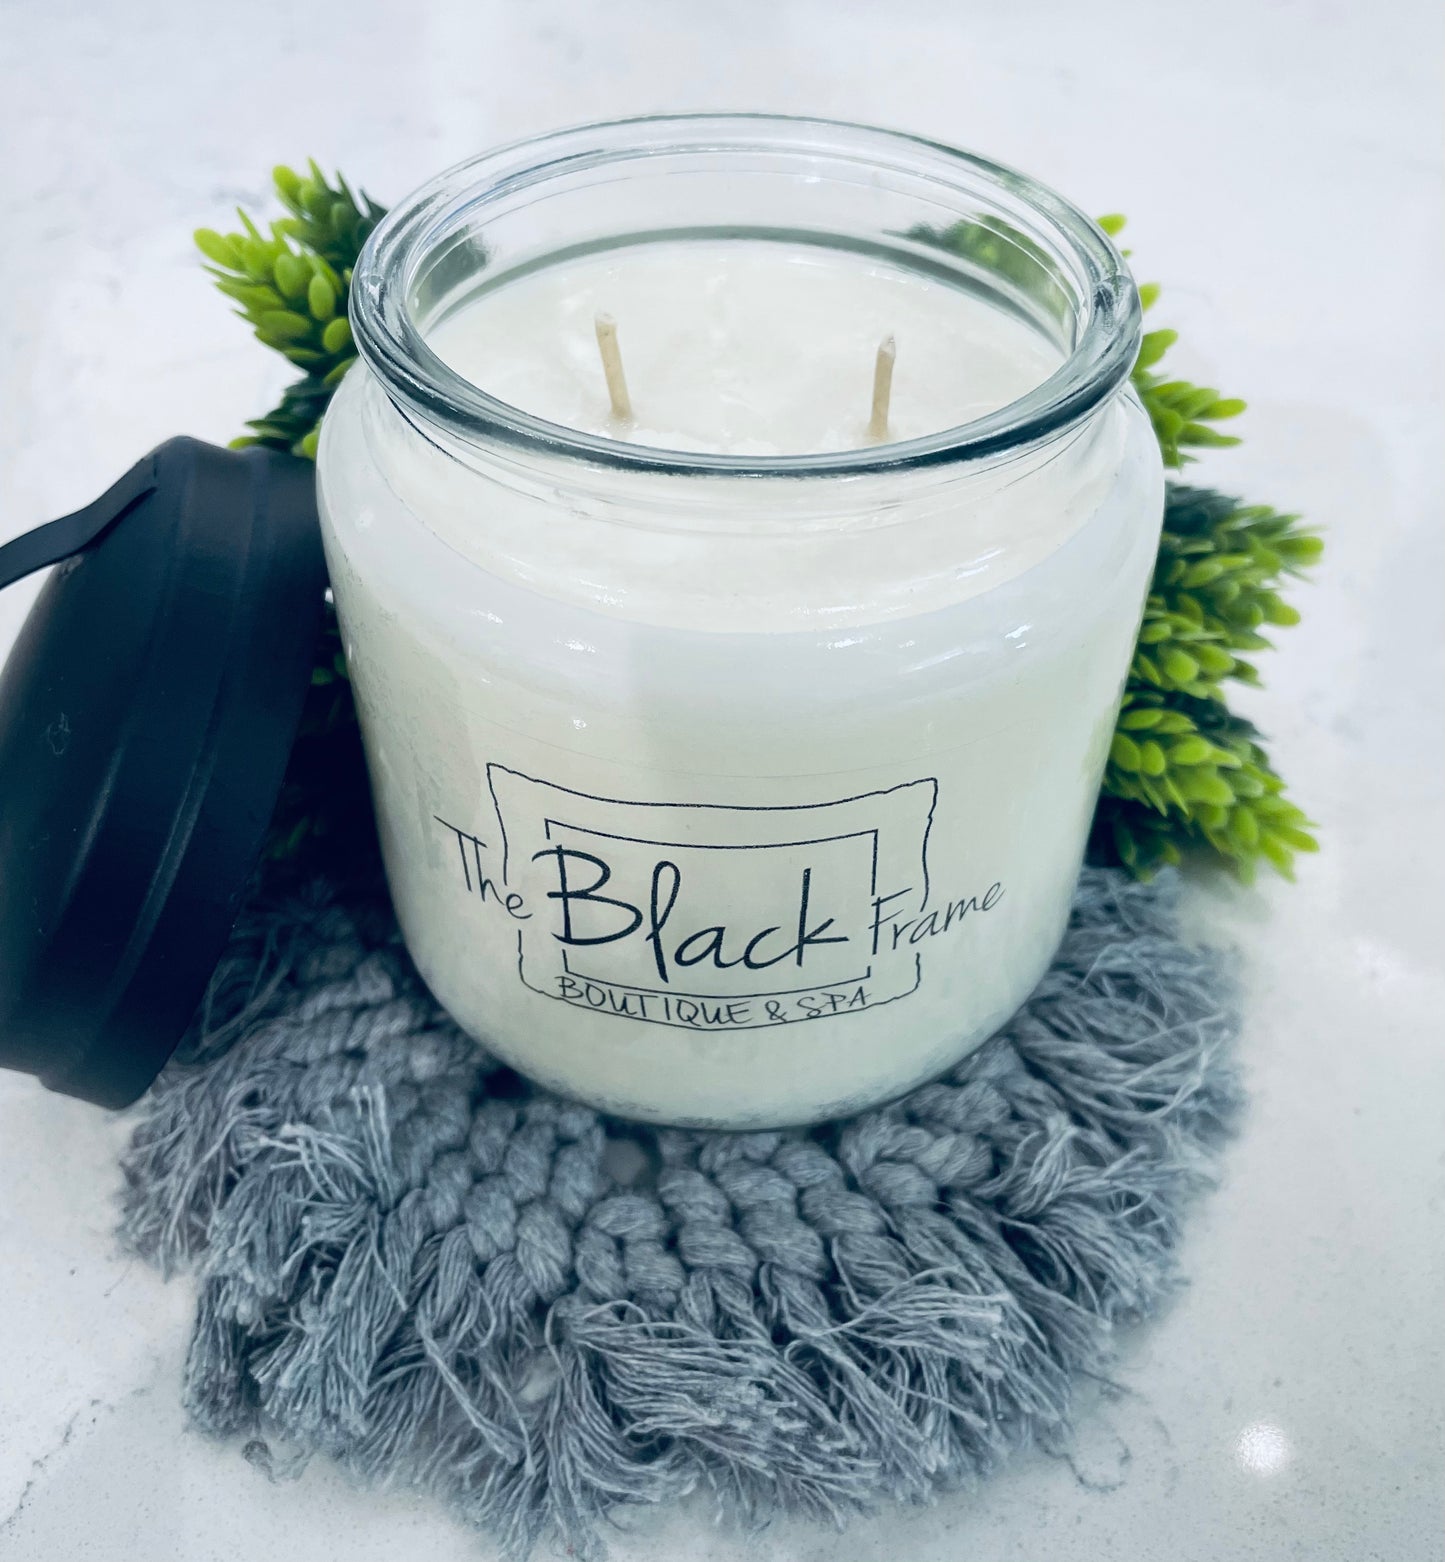 The Black Frame Scented Candle